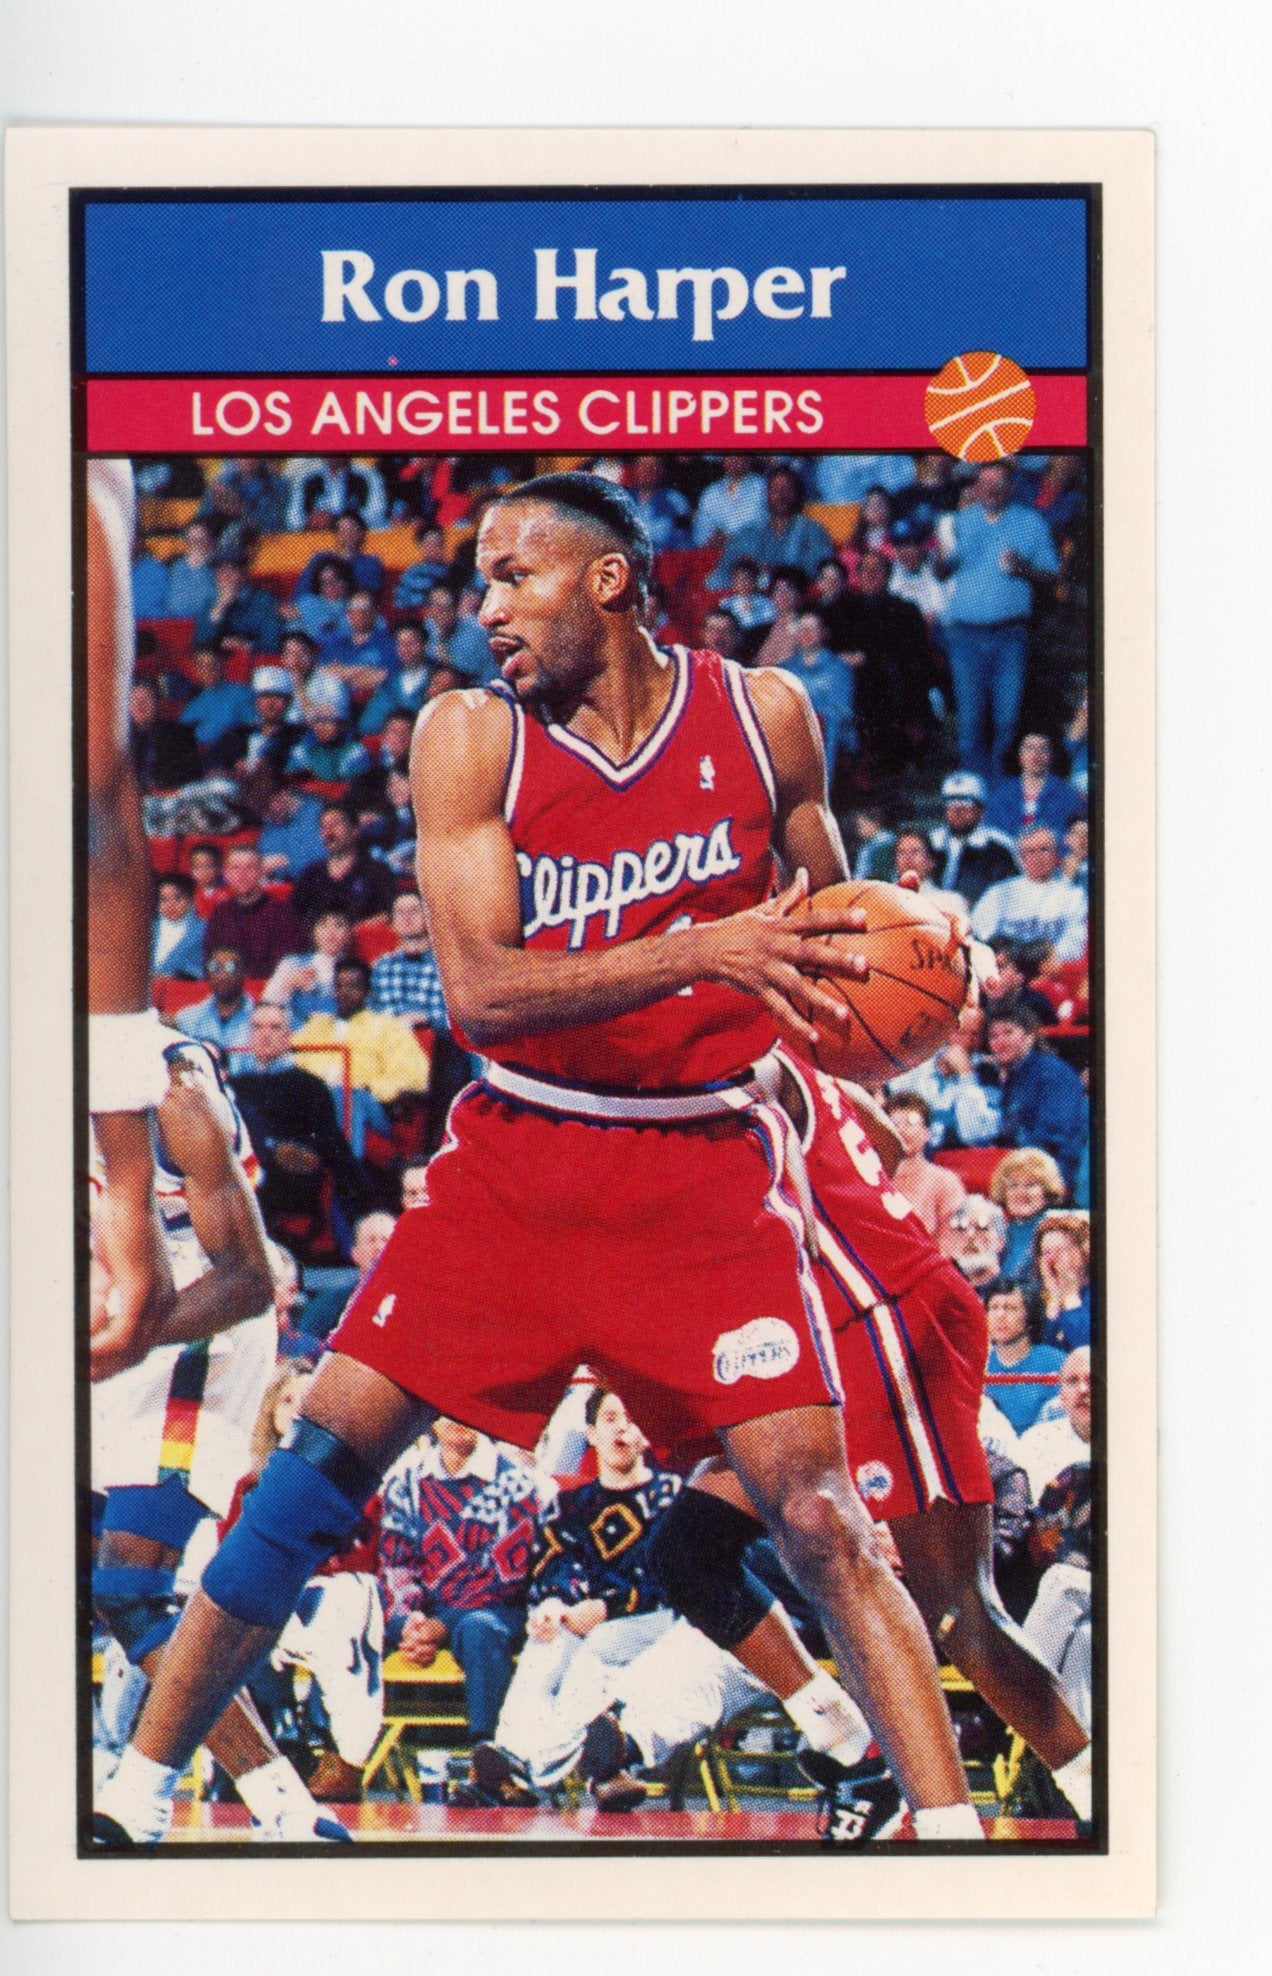 Ron Harper Panini 1992-1993 Basketball Sticker Los Angeles Clippers #28